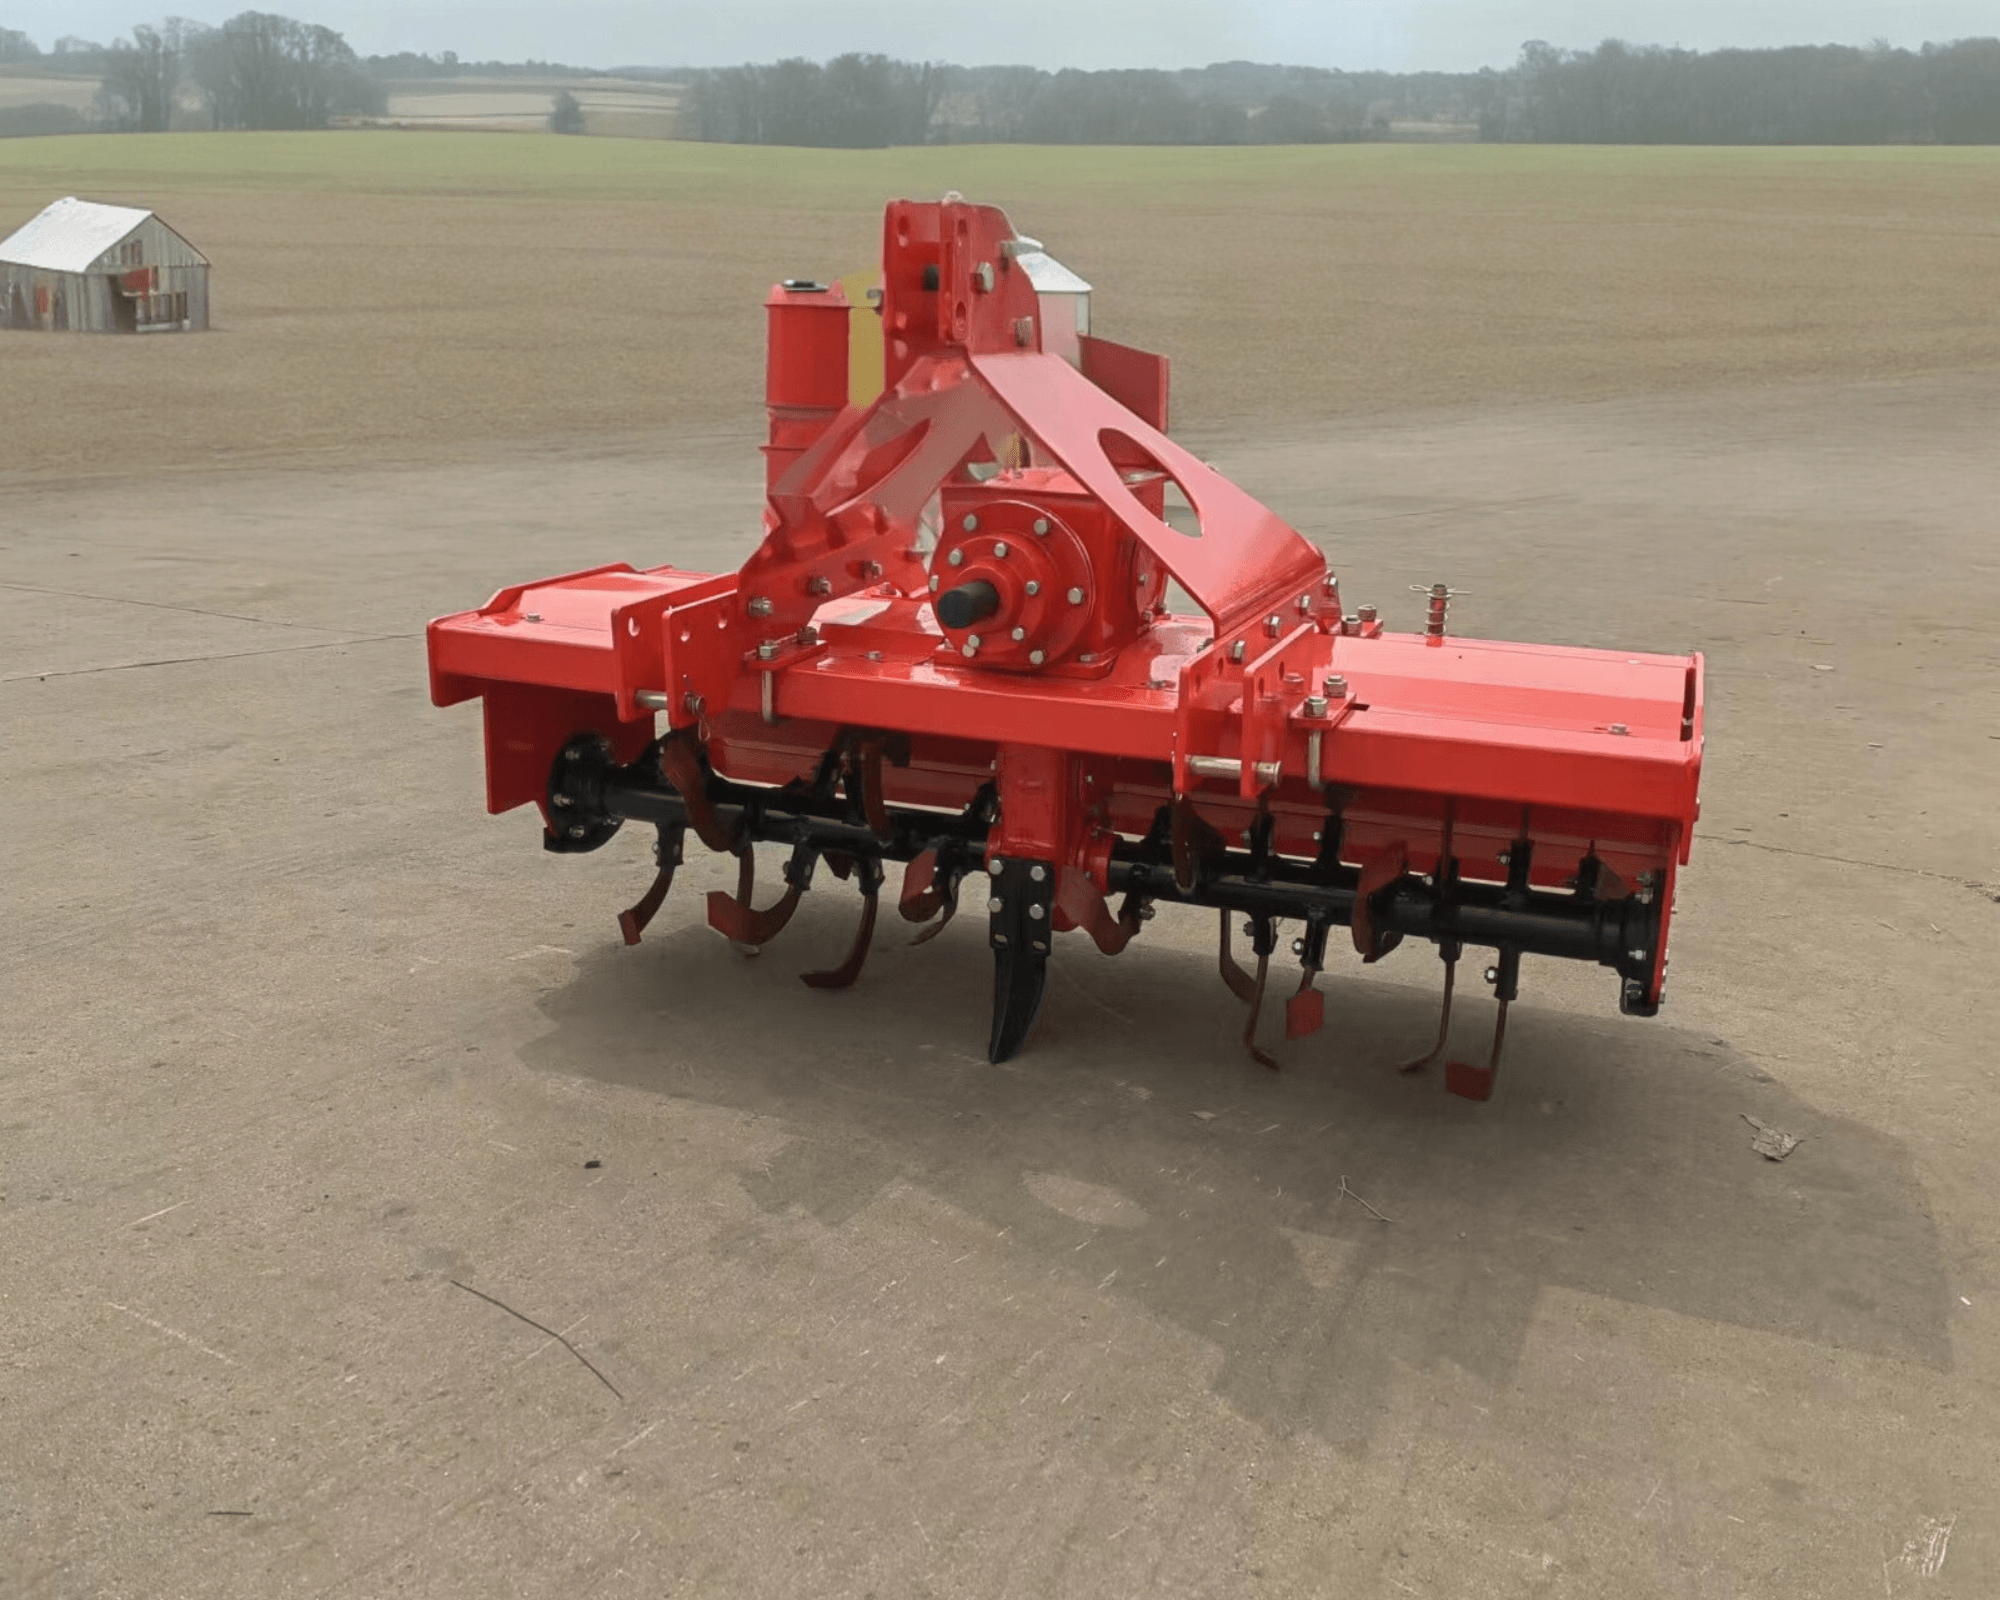 Rotavator - Rotary Tiller 140 for LEITE tractors